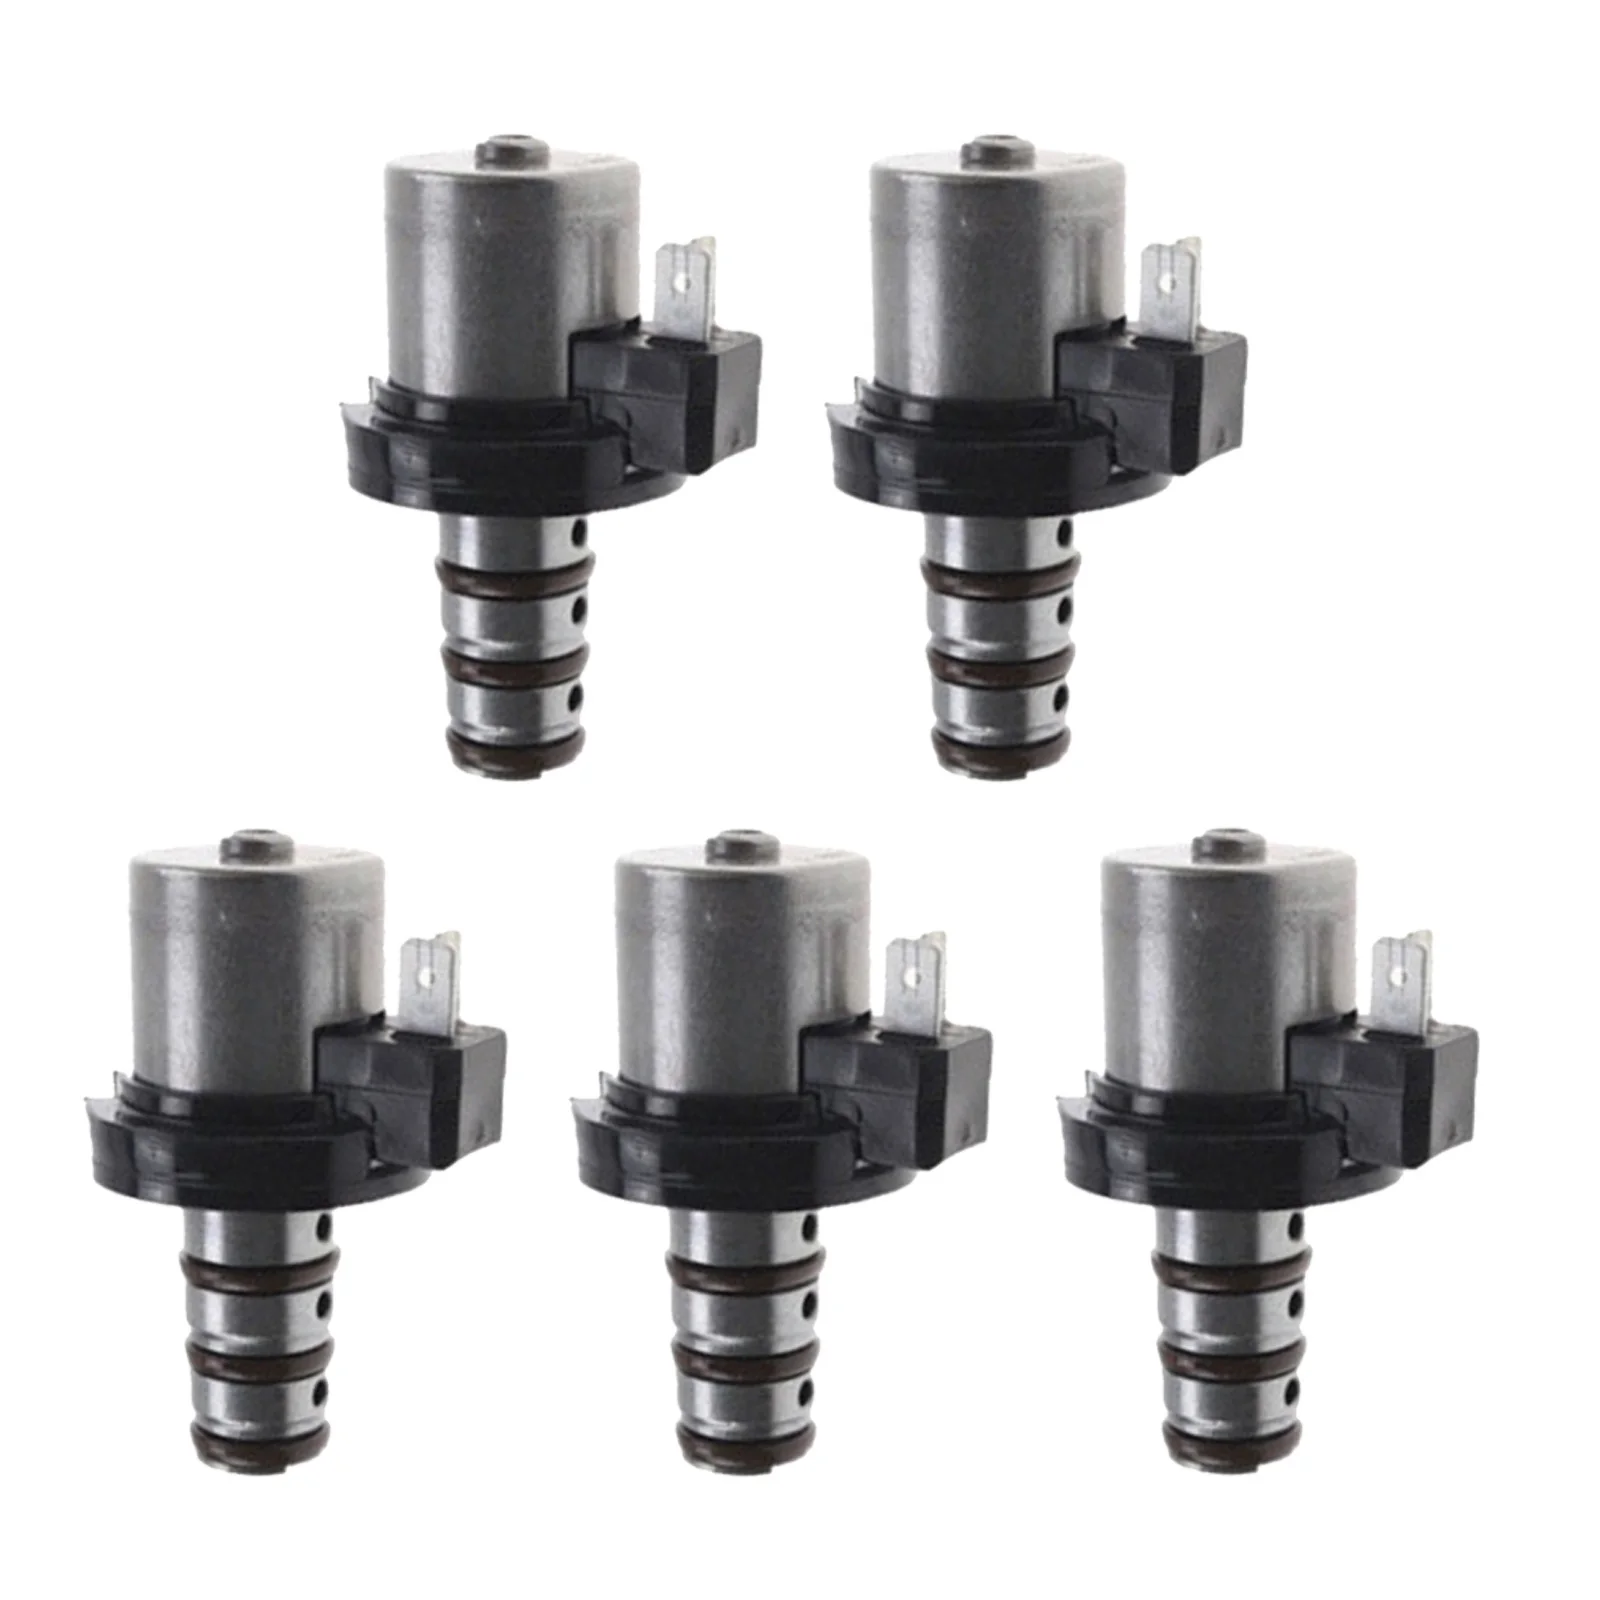 

5Pcs Control Transmission Solenoid Set 8981 R4A51 km-41 F4 F4A41 Replacement 4 Automatic Modes